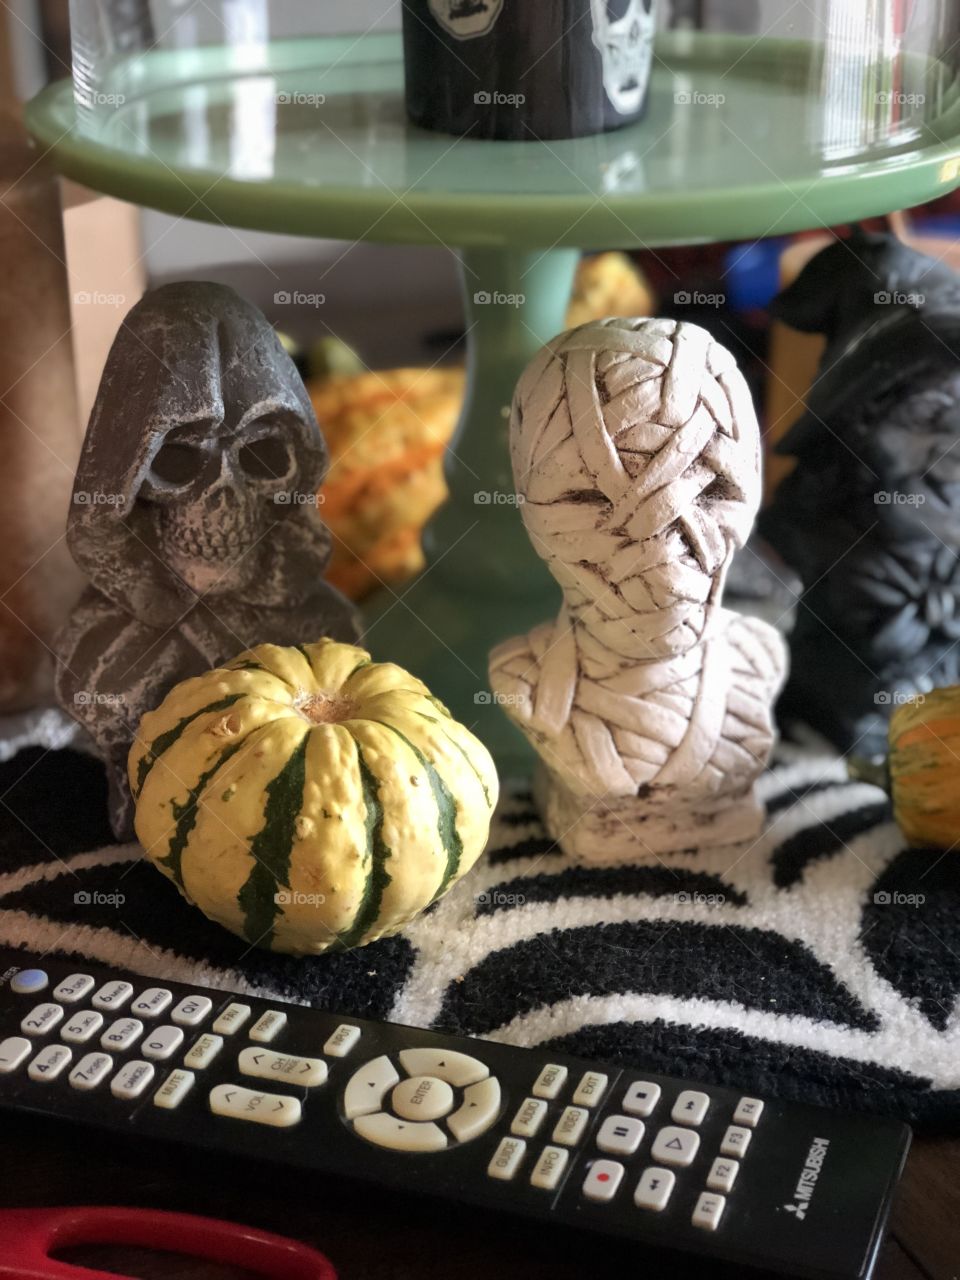 Fall gourds, tv remote, mummy bust, and the bust of a grim reaper